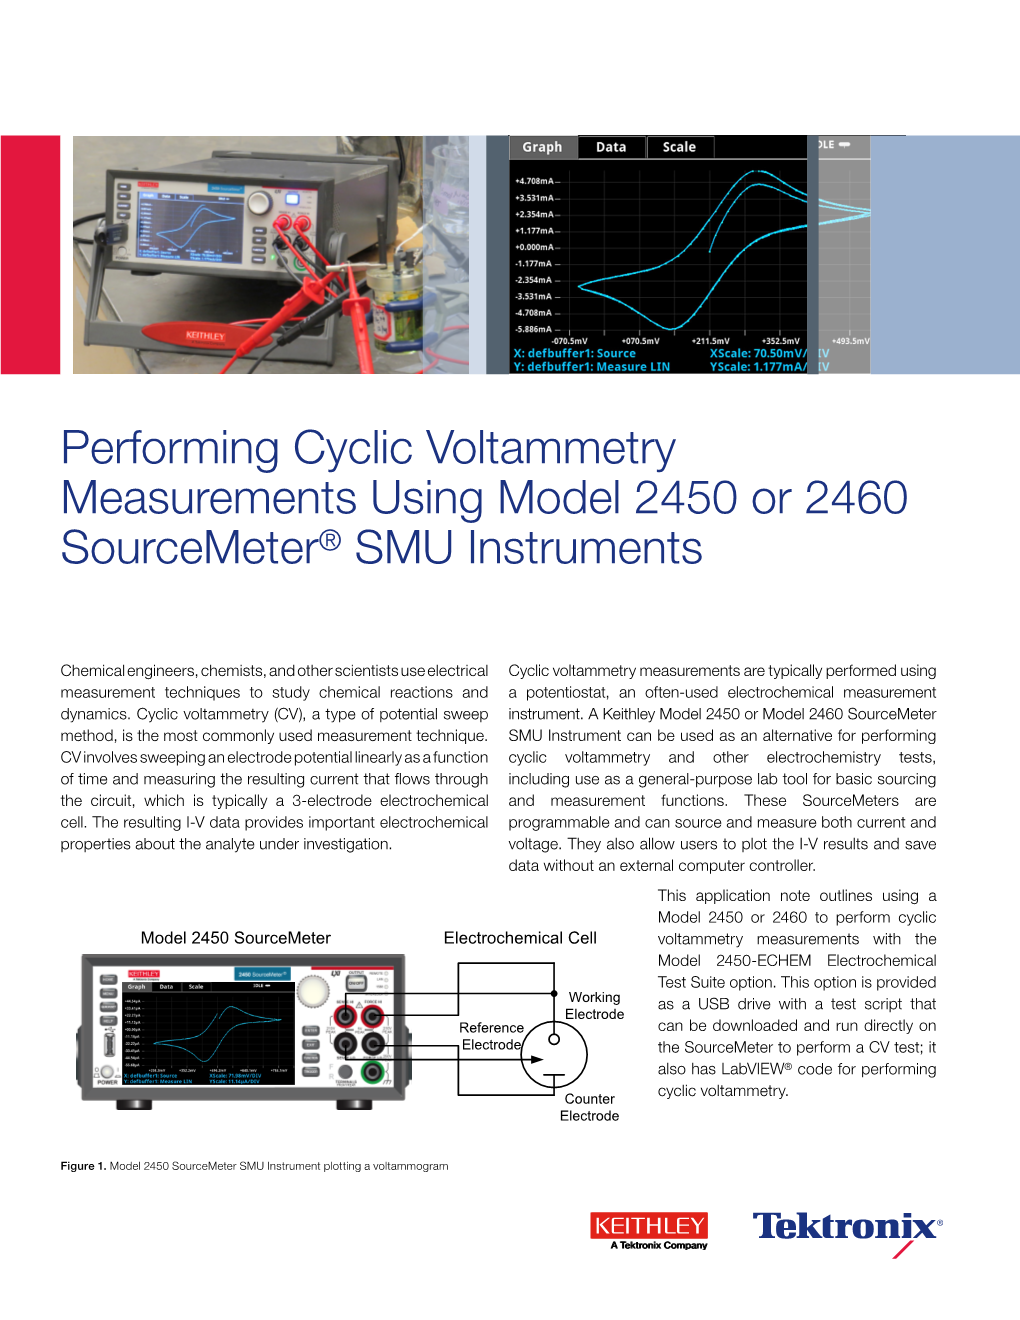 Cyclic Voltammetry Measurements with Models 2450/2460